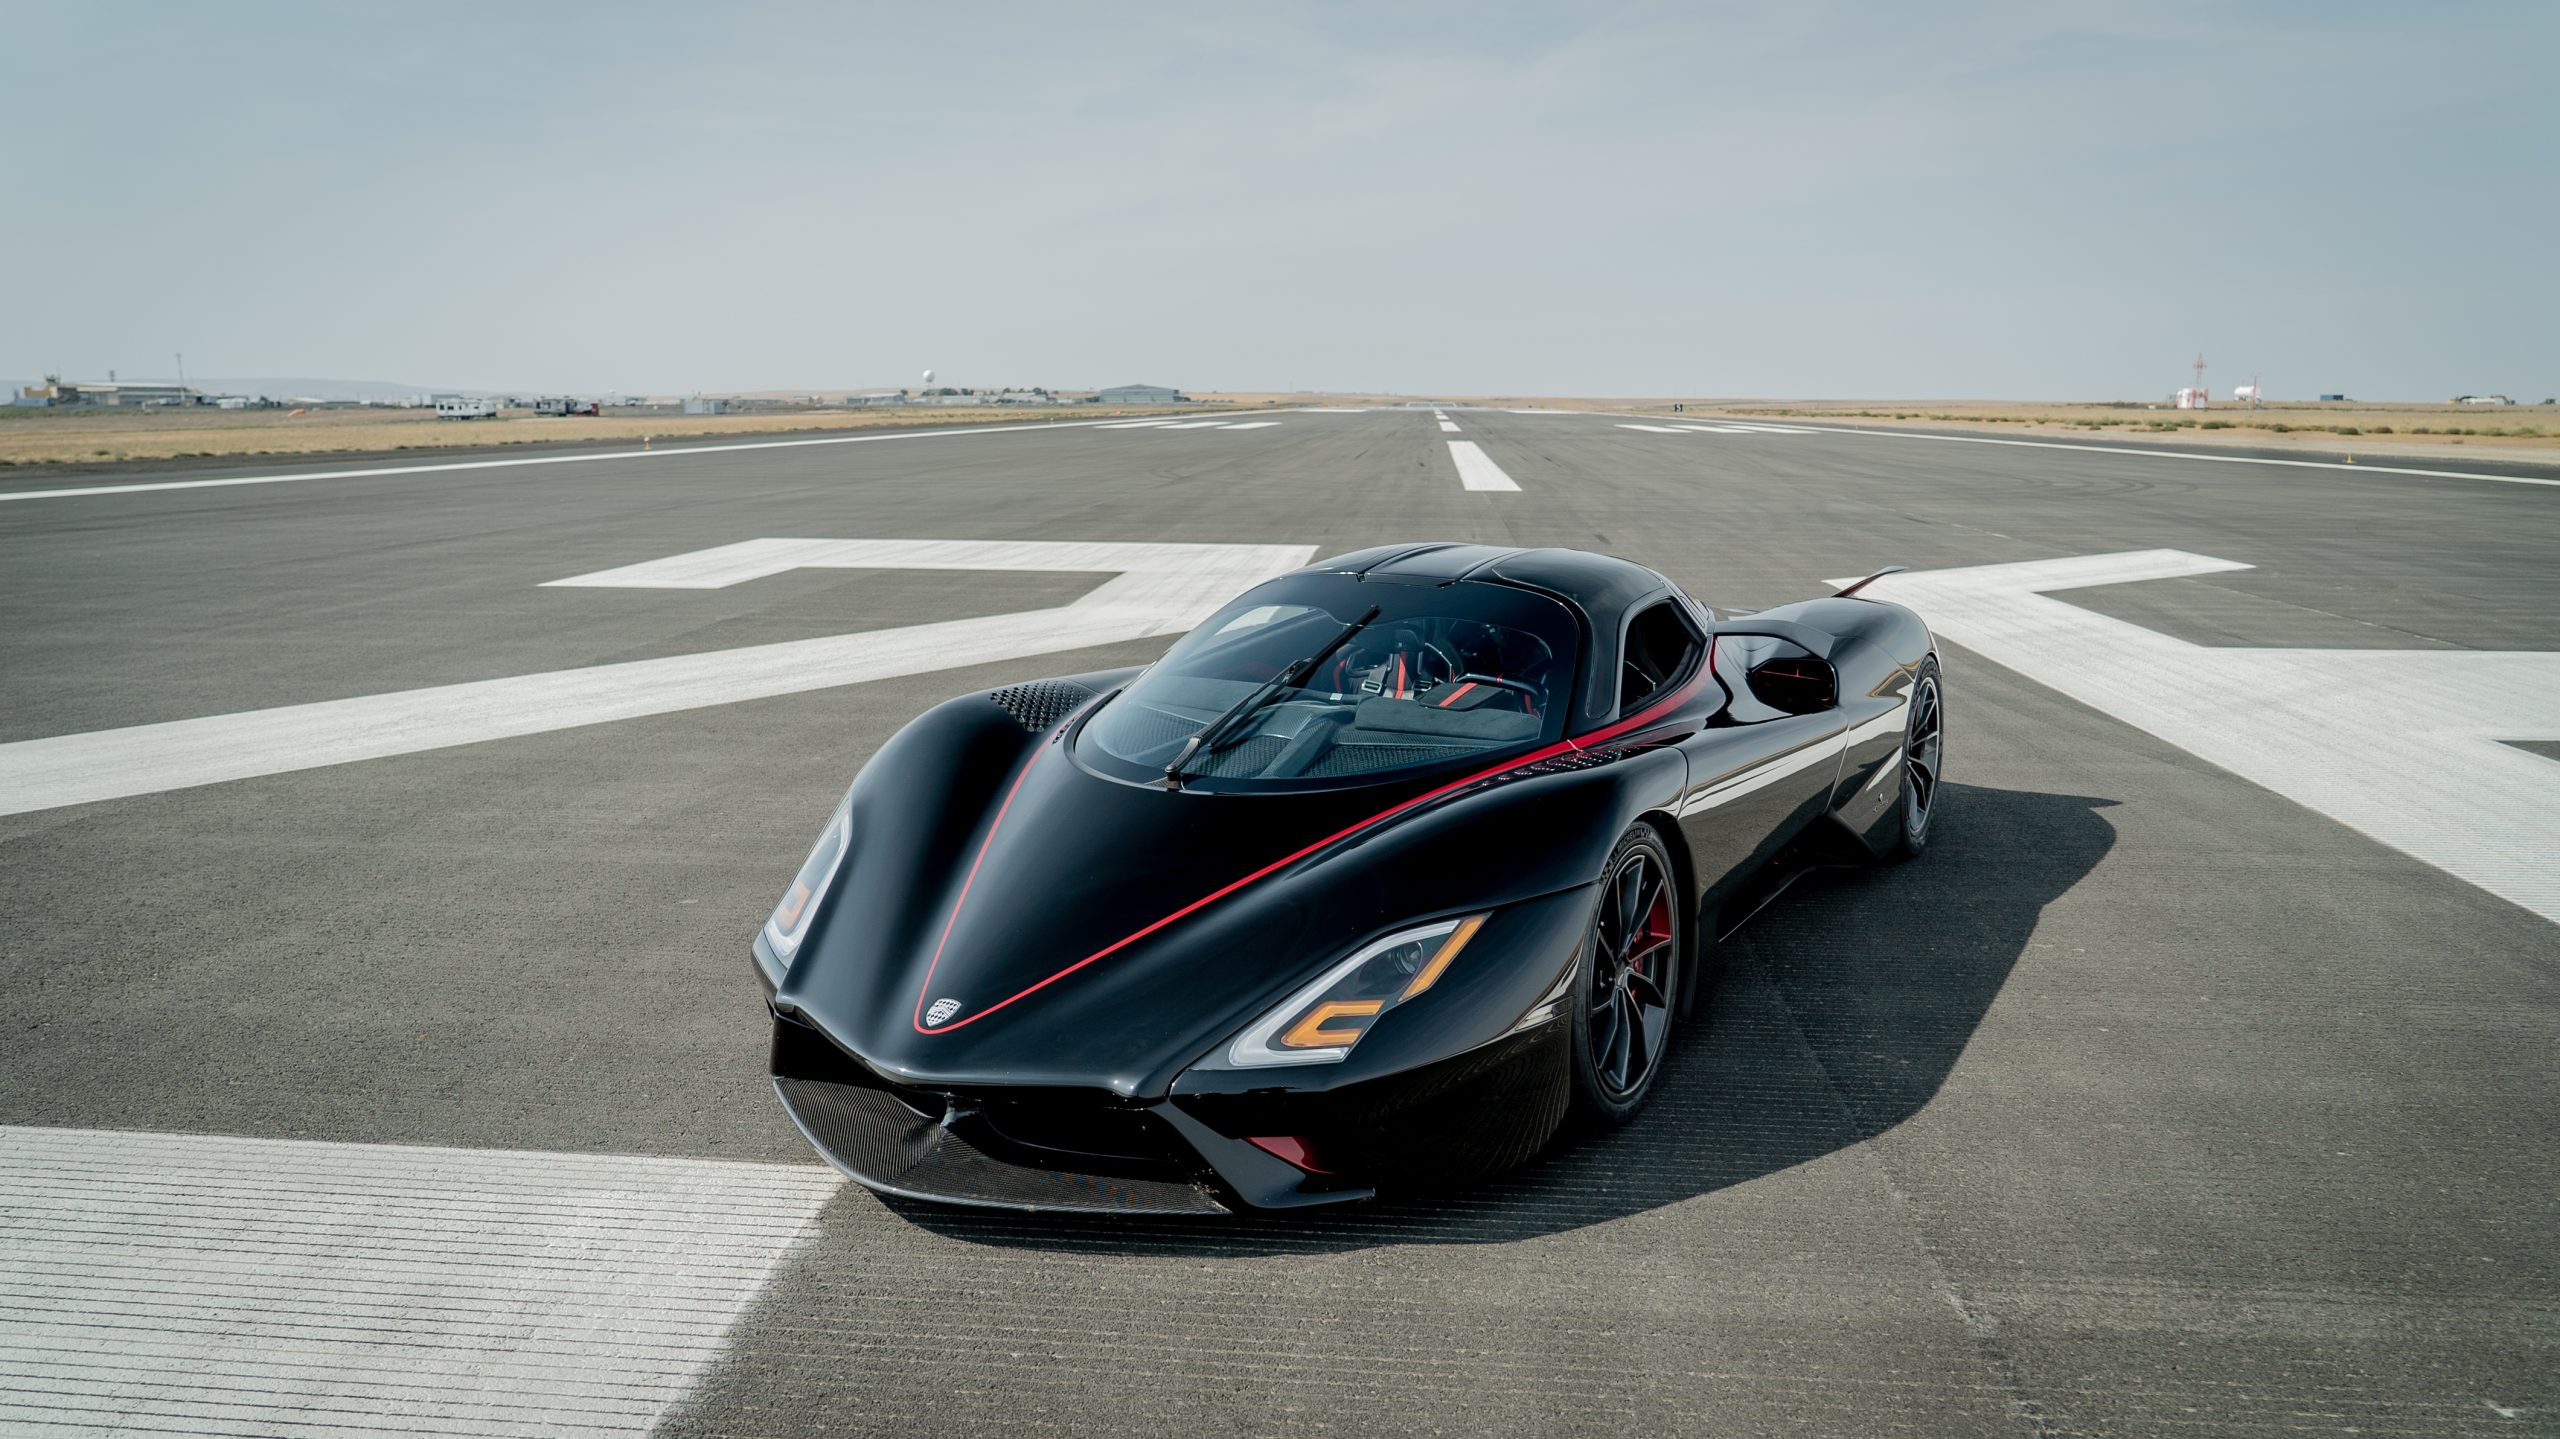 The SSC Tuatara has broken 330 mph and shattered a world speed record | DeviceDaily.com